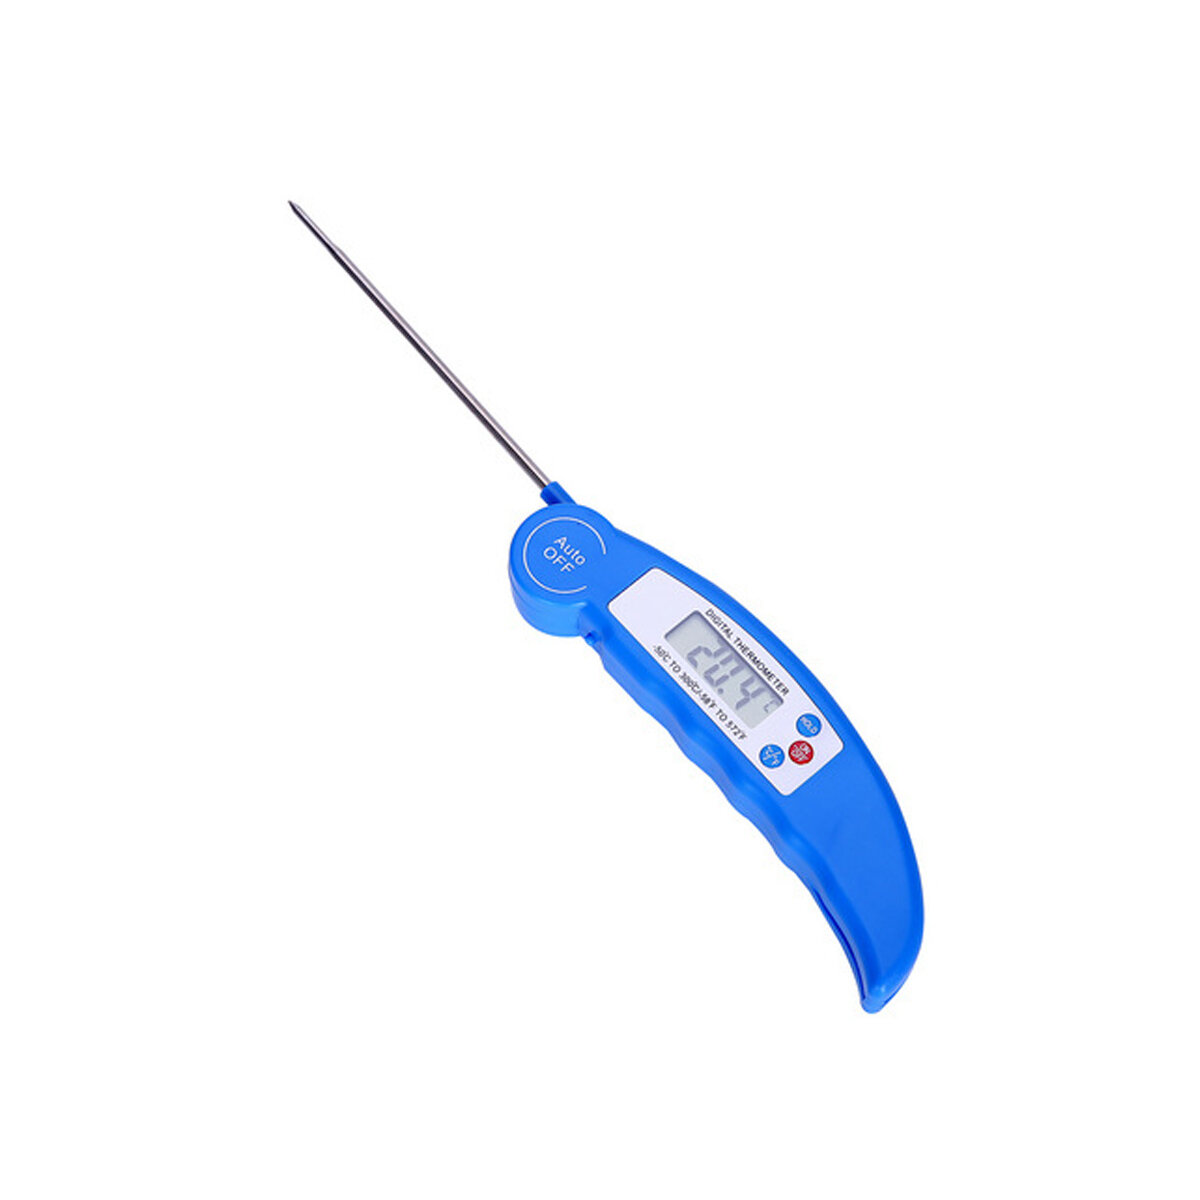 Digital Thermometer With Probe Folding Grocery Barbecue Meat Stove Foldable Kitchen Cooking Device